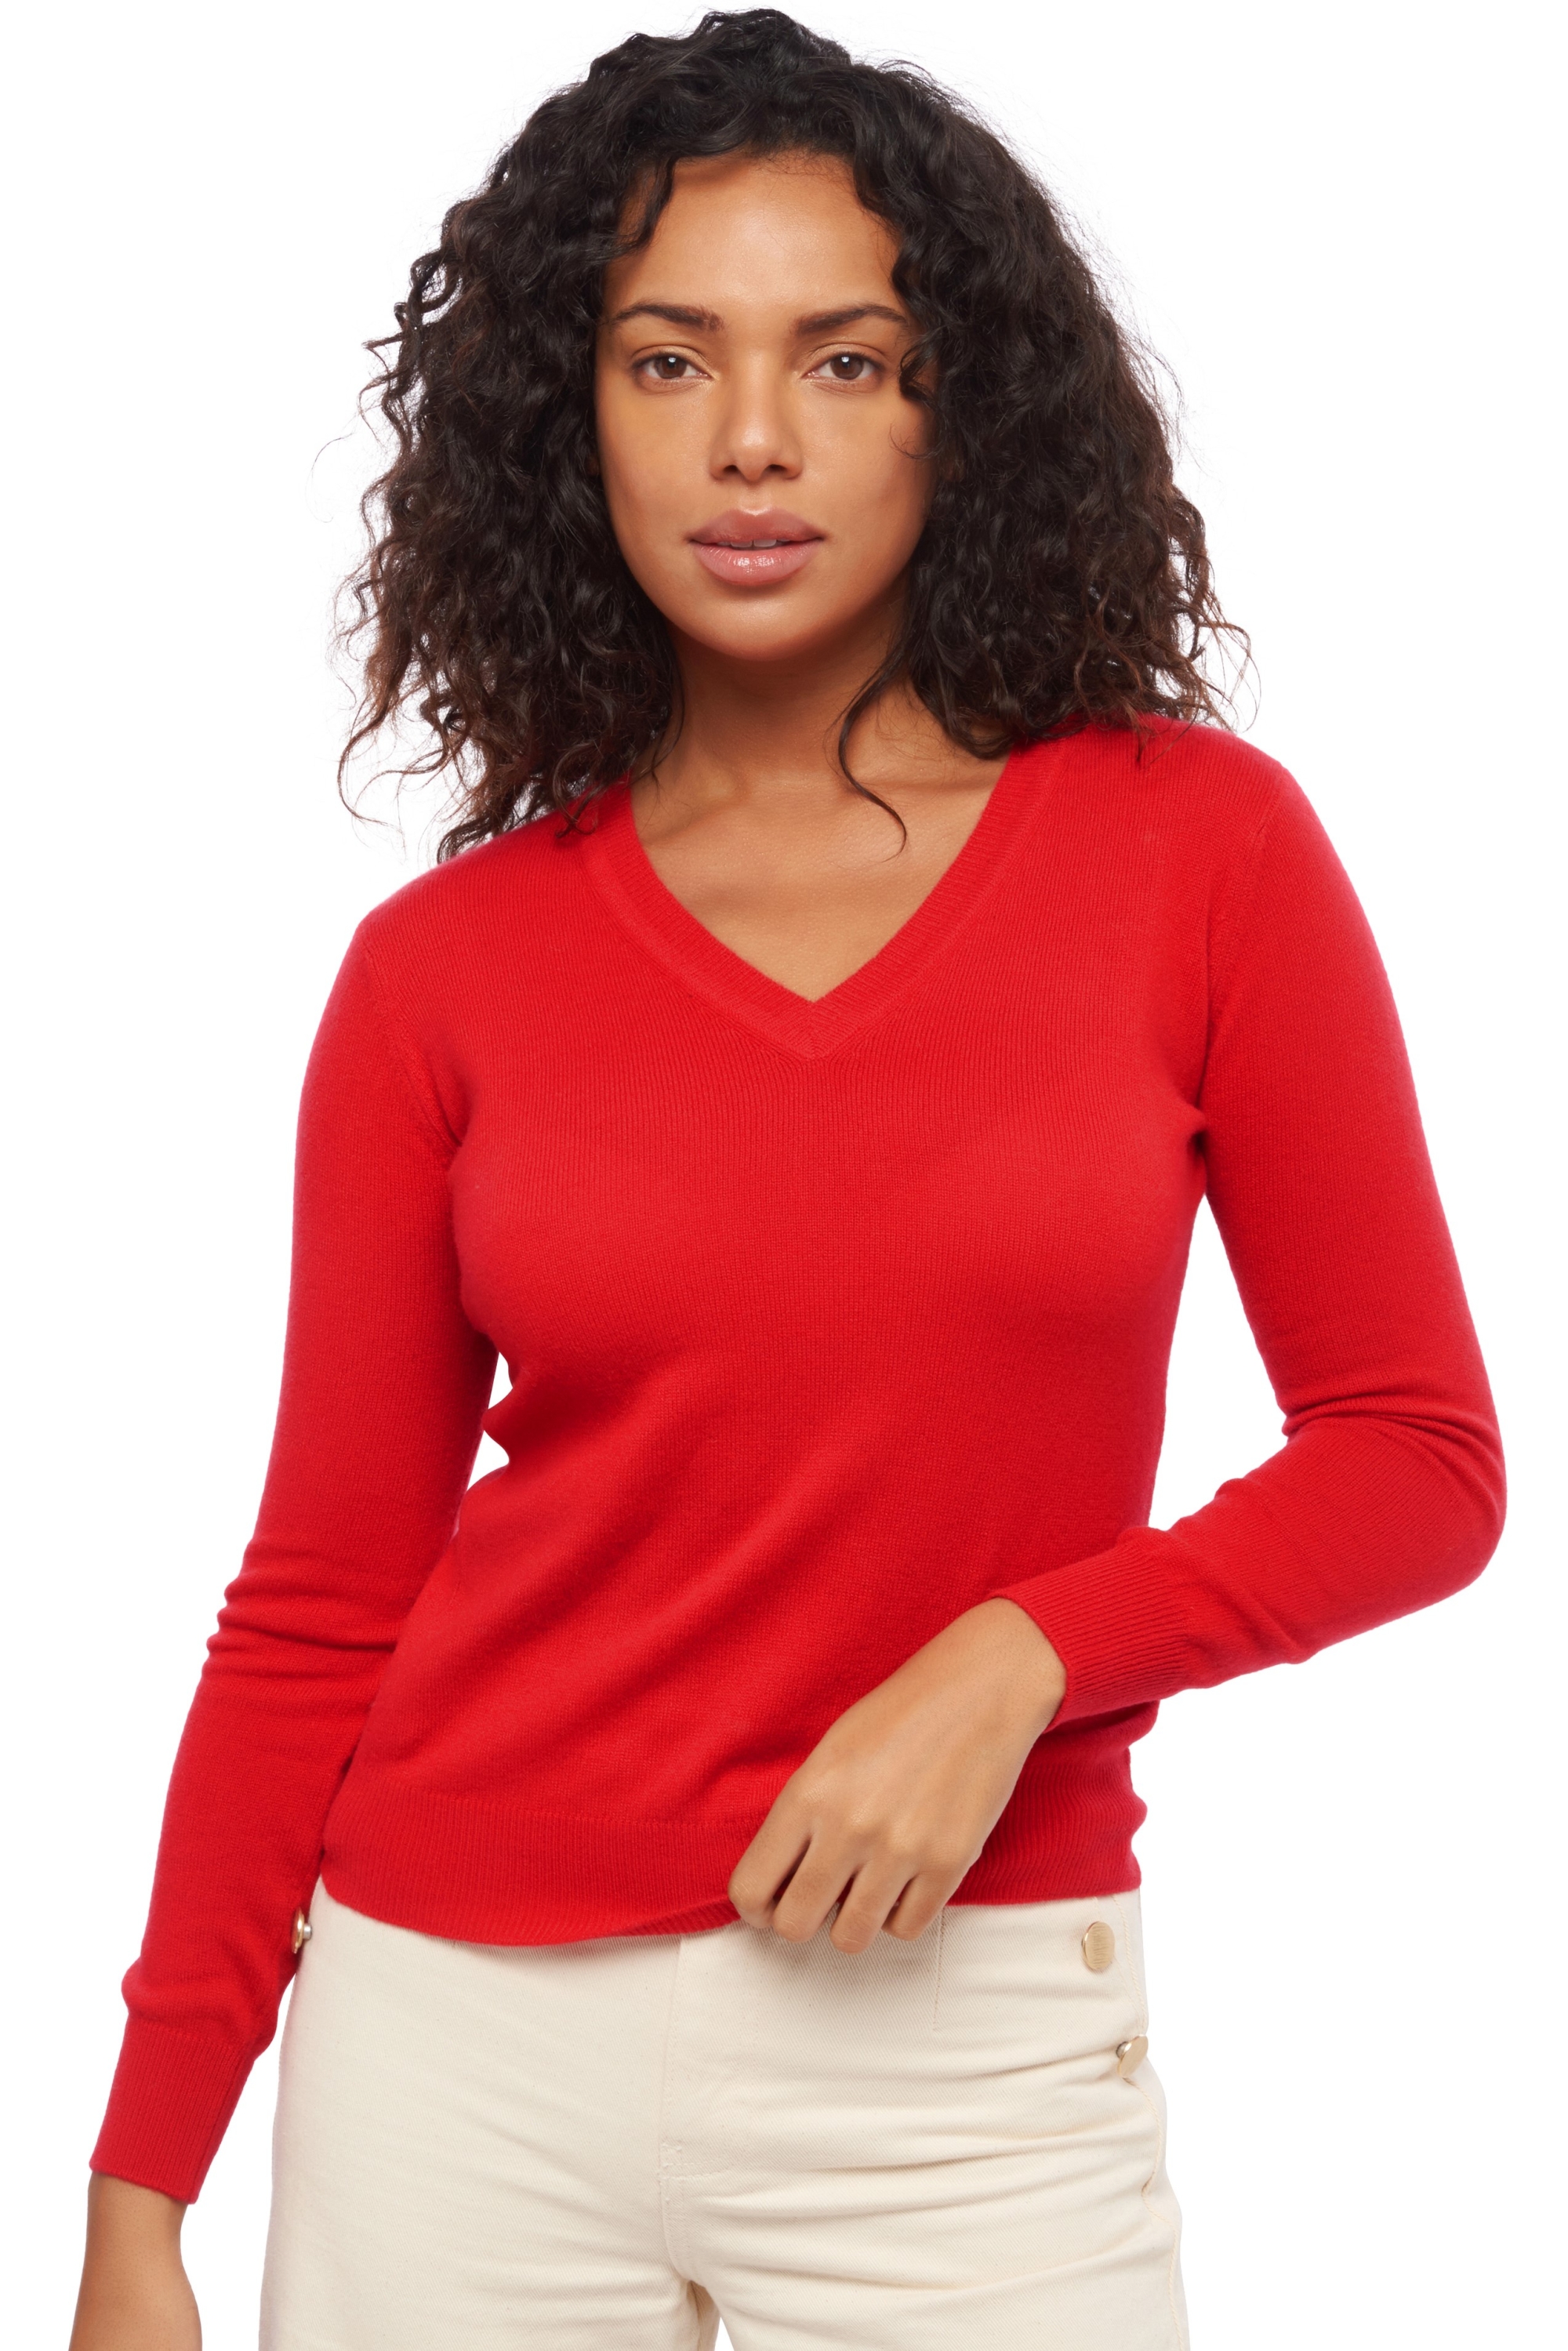 Cashmere ladies timeless classics faustine blood red l